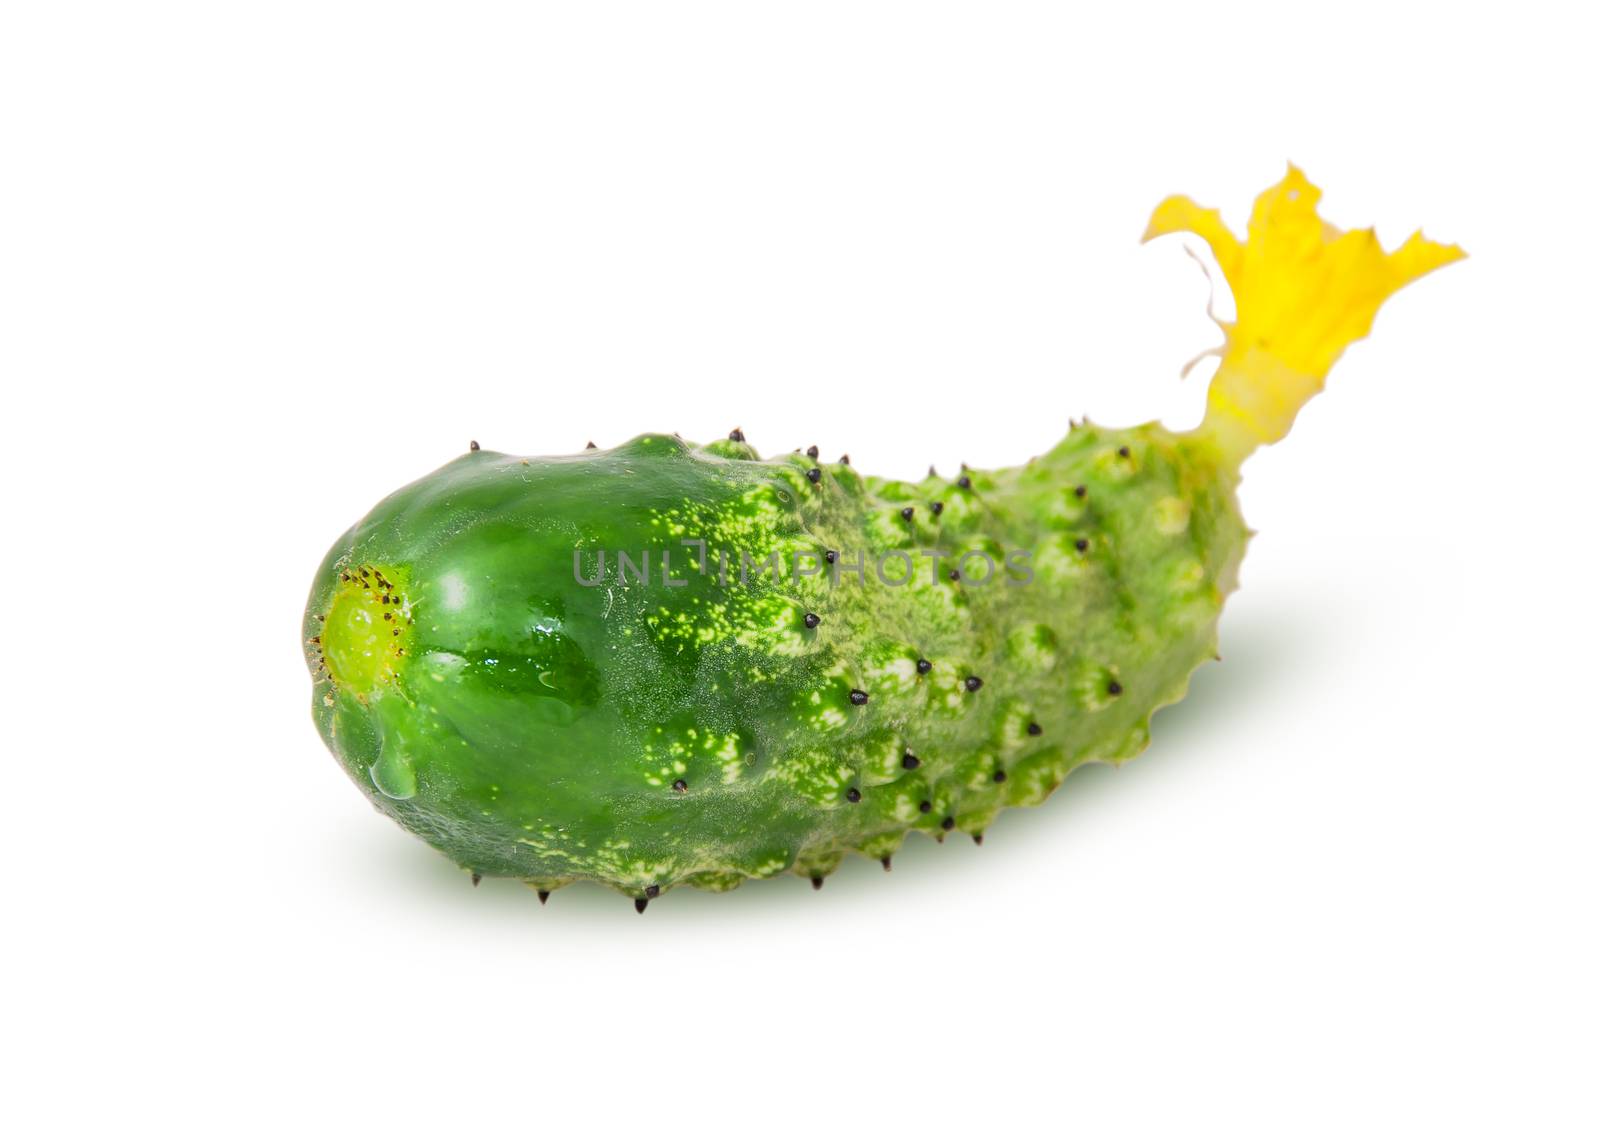 Juicy green cucumber rotated by Cipariss